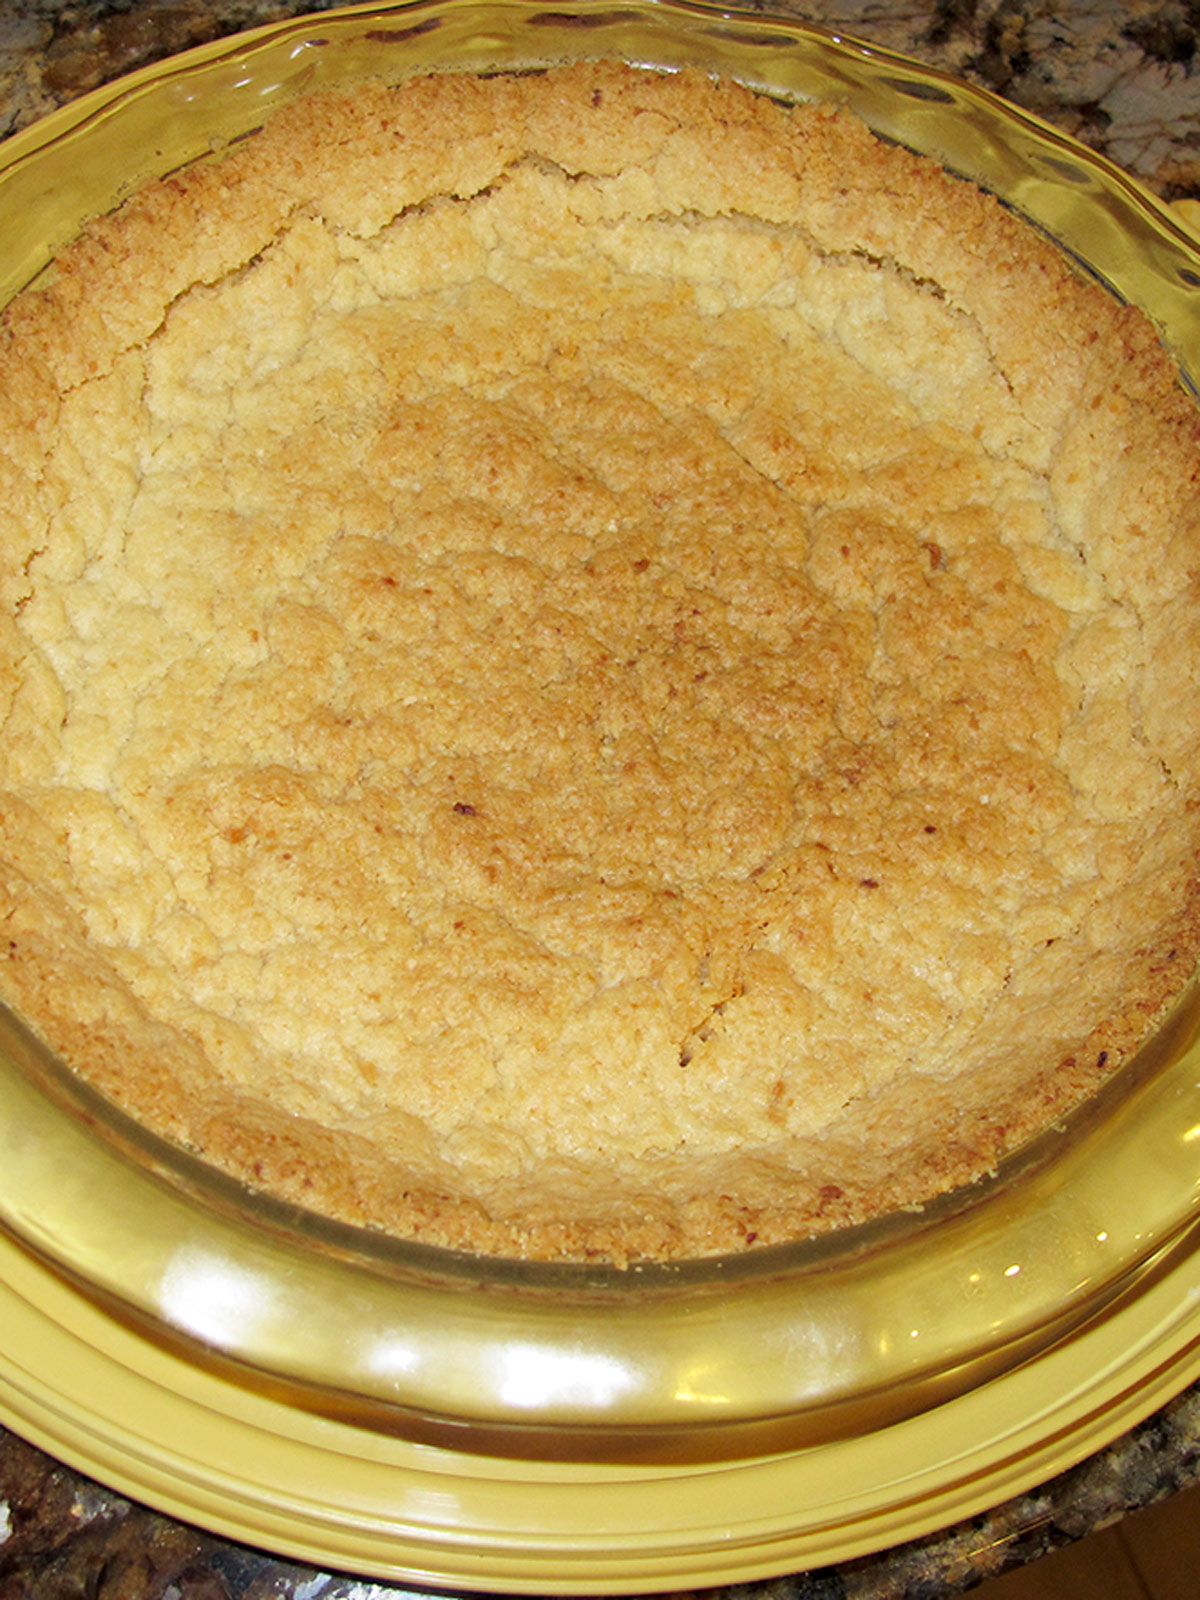 Chocolate key lime pie baked crust in a glass pan.